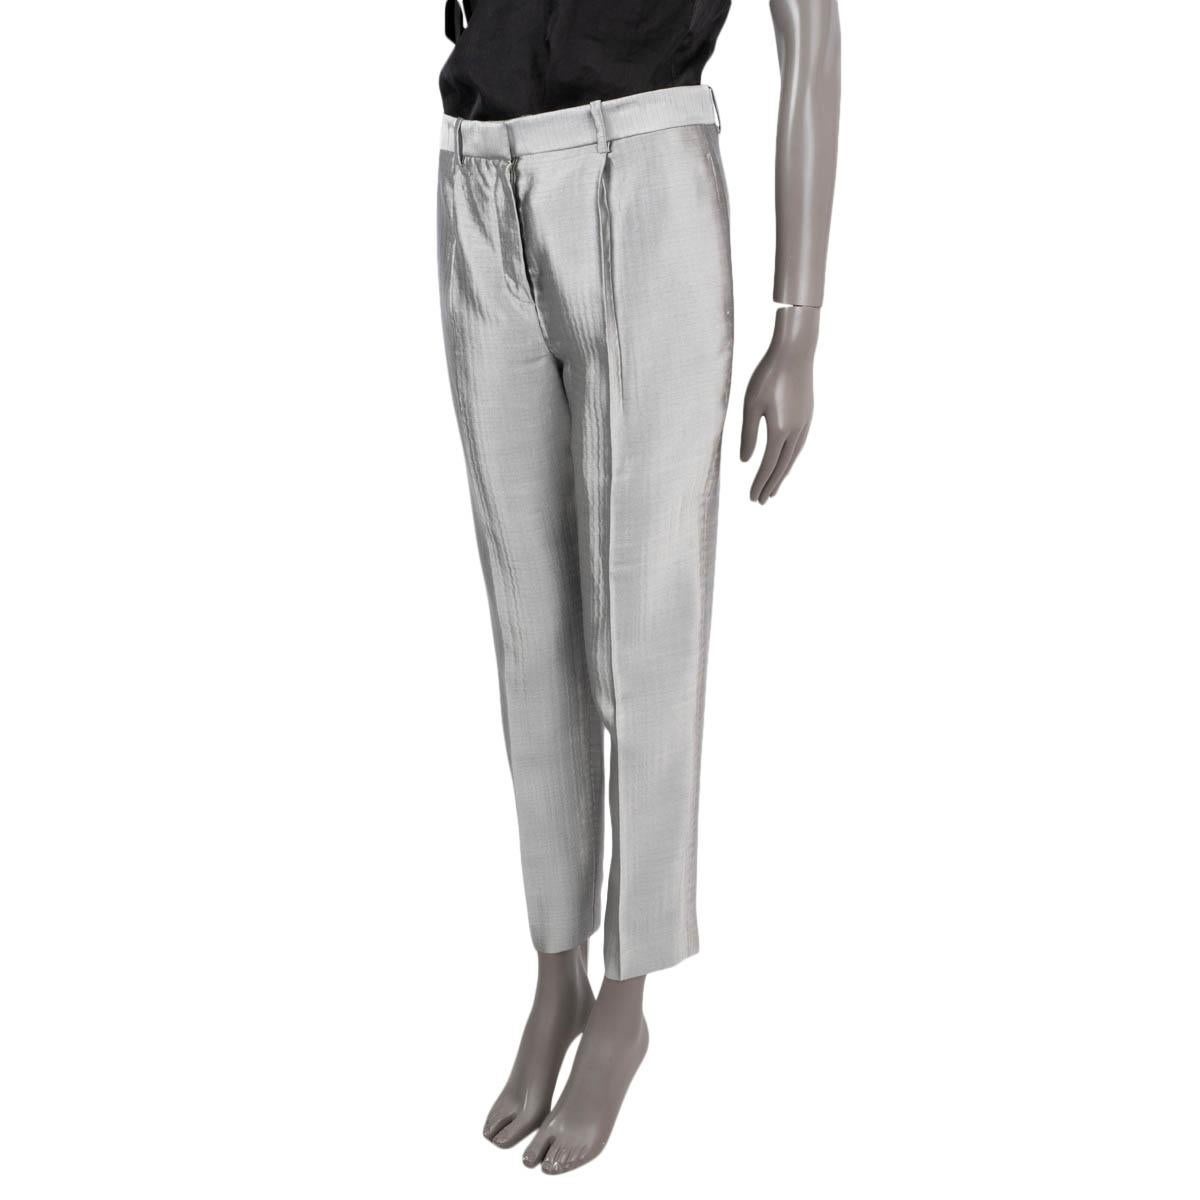 100% authentic The Row 'William' cropped straight leg pants in metallic silvr wool (56%), viscose (29%) and silk (15%). Features two slit pockets on the side and one sewn shut slit pocket at the back. Pockets lined in gray cupro (100%). Has been